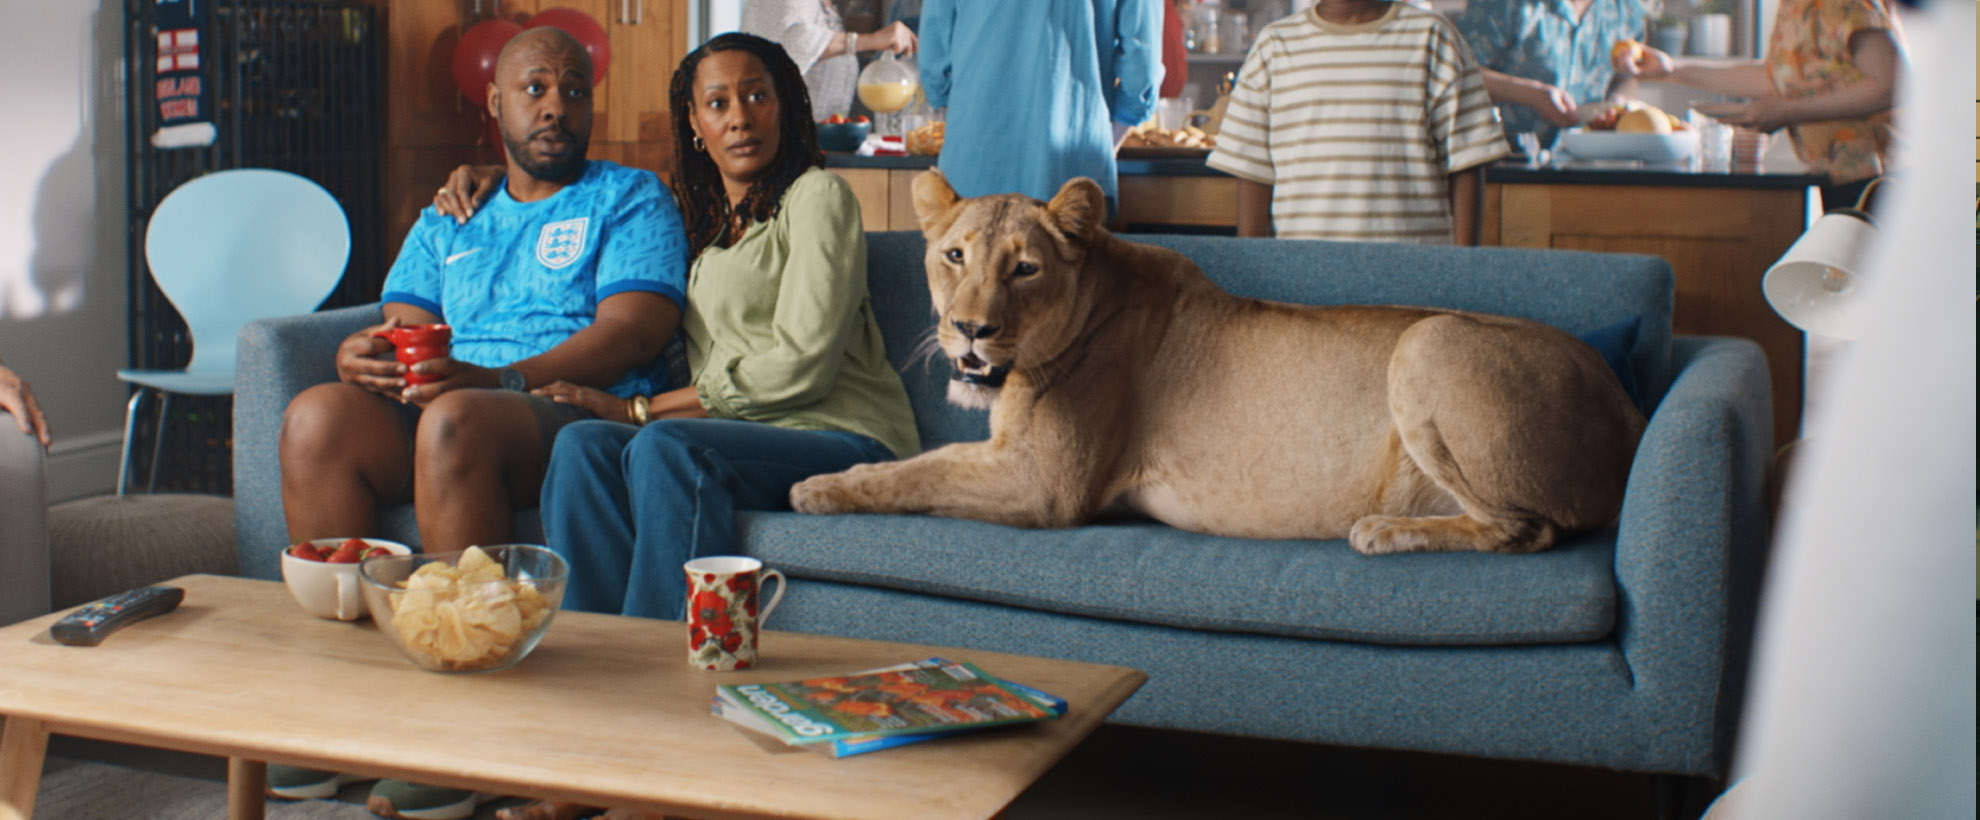 A lioness lays on a living room couch as a couple looks shocked sitting next to it